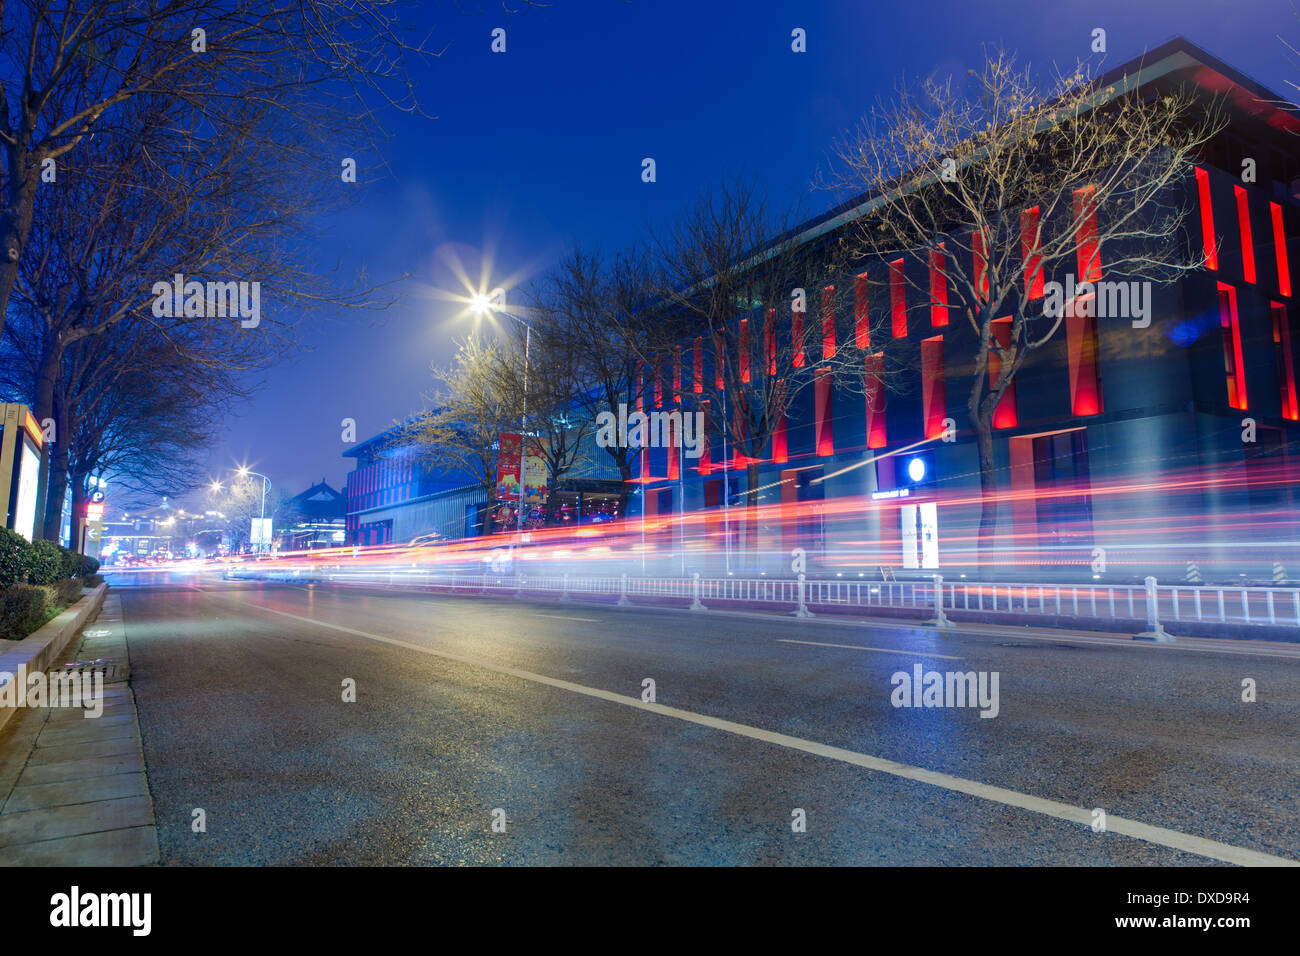 building and urban road at night Stock Photo